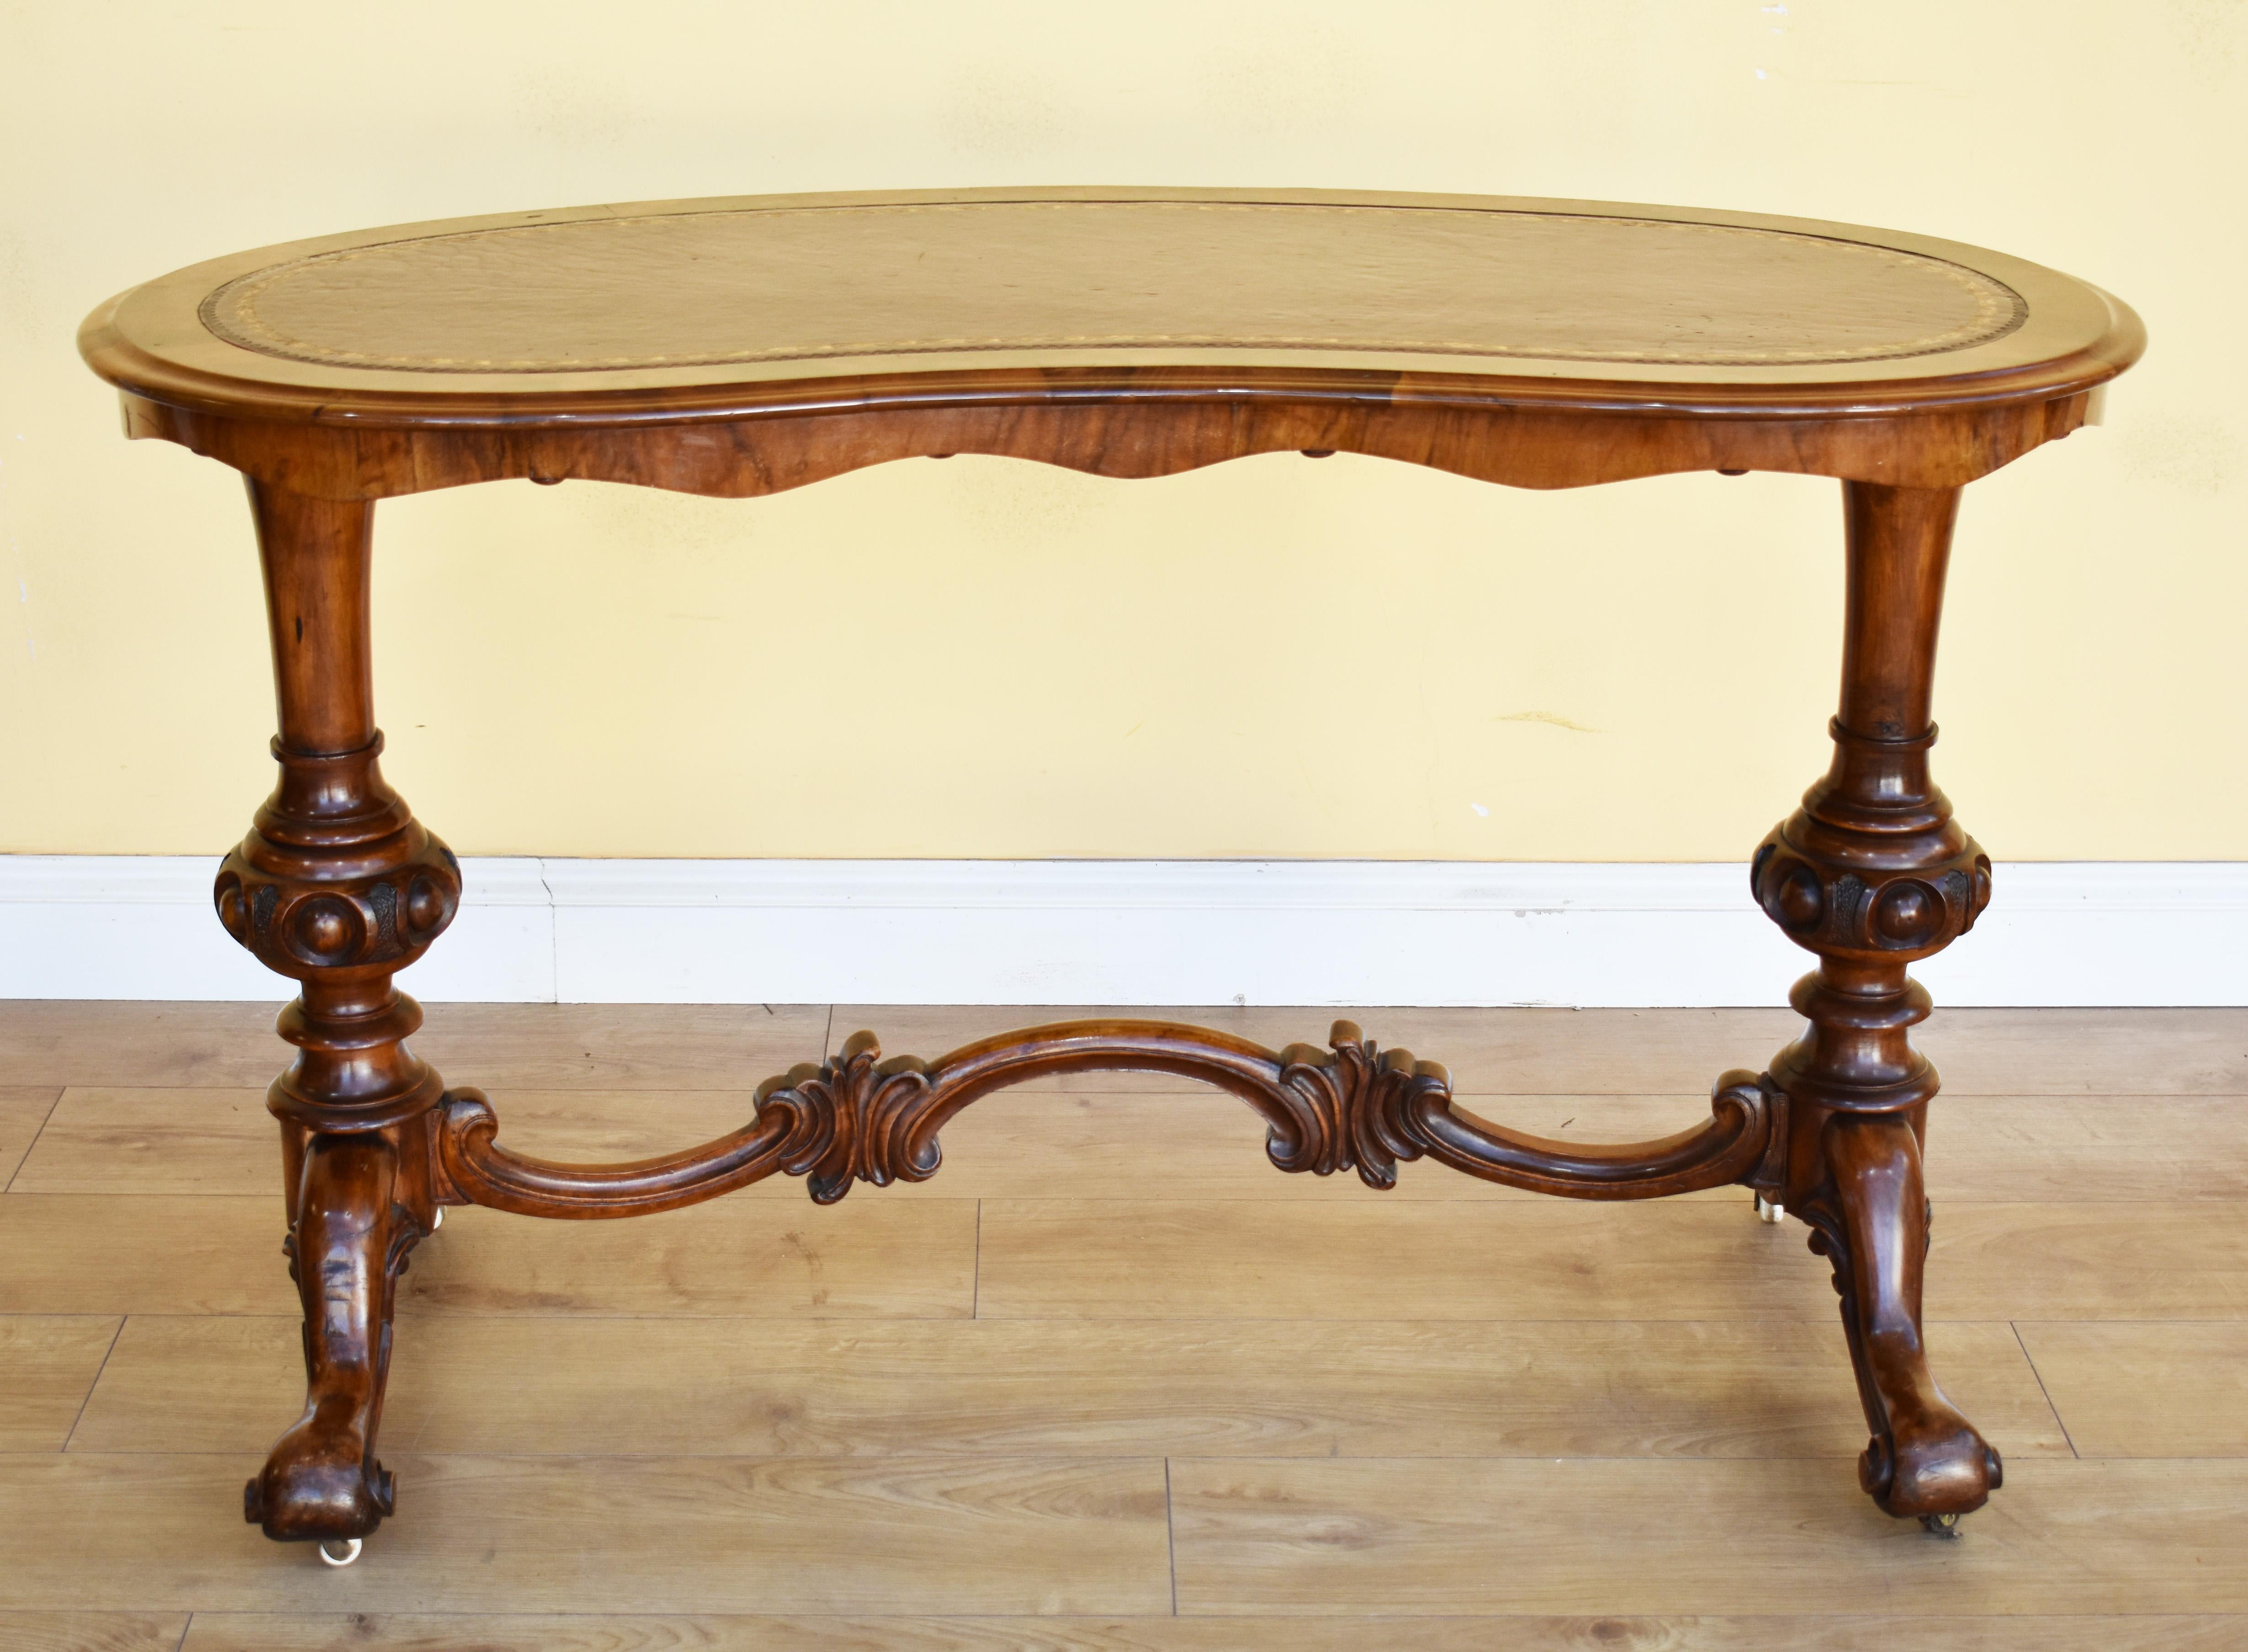 For sale is a good quality 19th century Victorian burr walnut kidney shaped ladies writing table. The top is inset with a maroon leather skiver, decorated with gold tooling. Below this is a nicely shaped frieze, flanked by two turned and carved